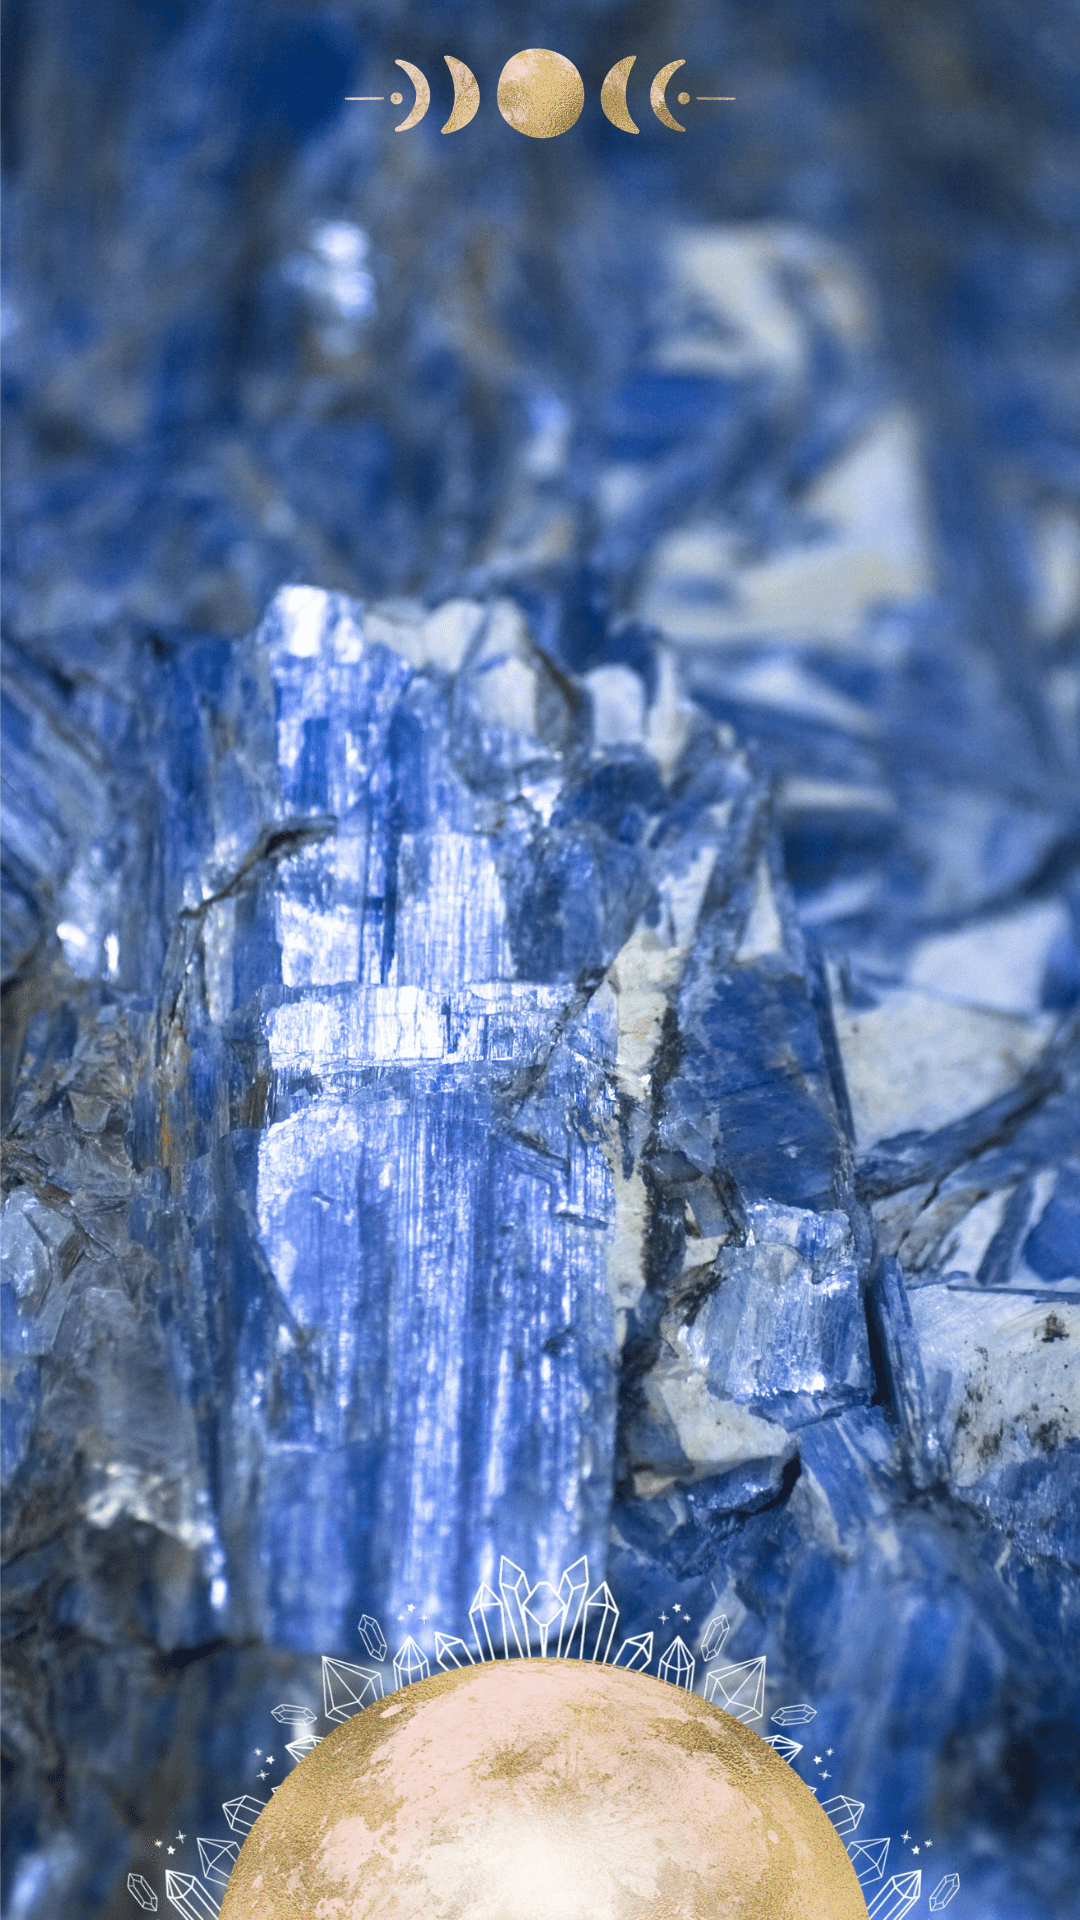 Healing Properties of Blue Kyanite: A Crystal for Truth & Justice